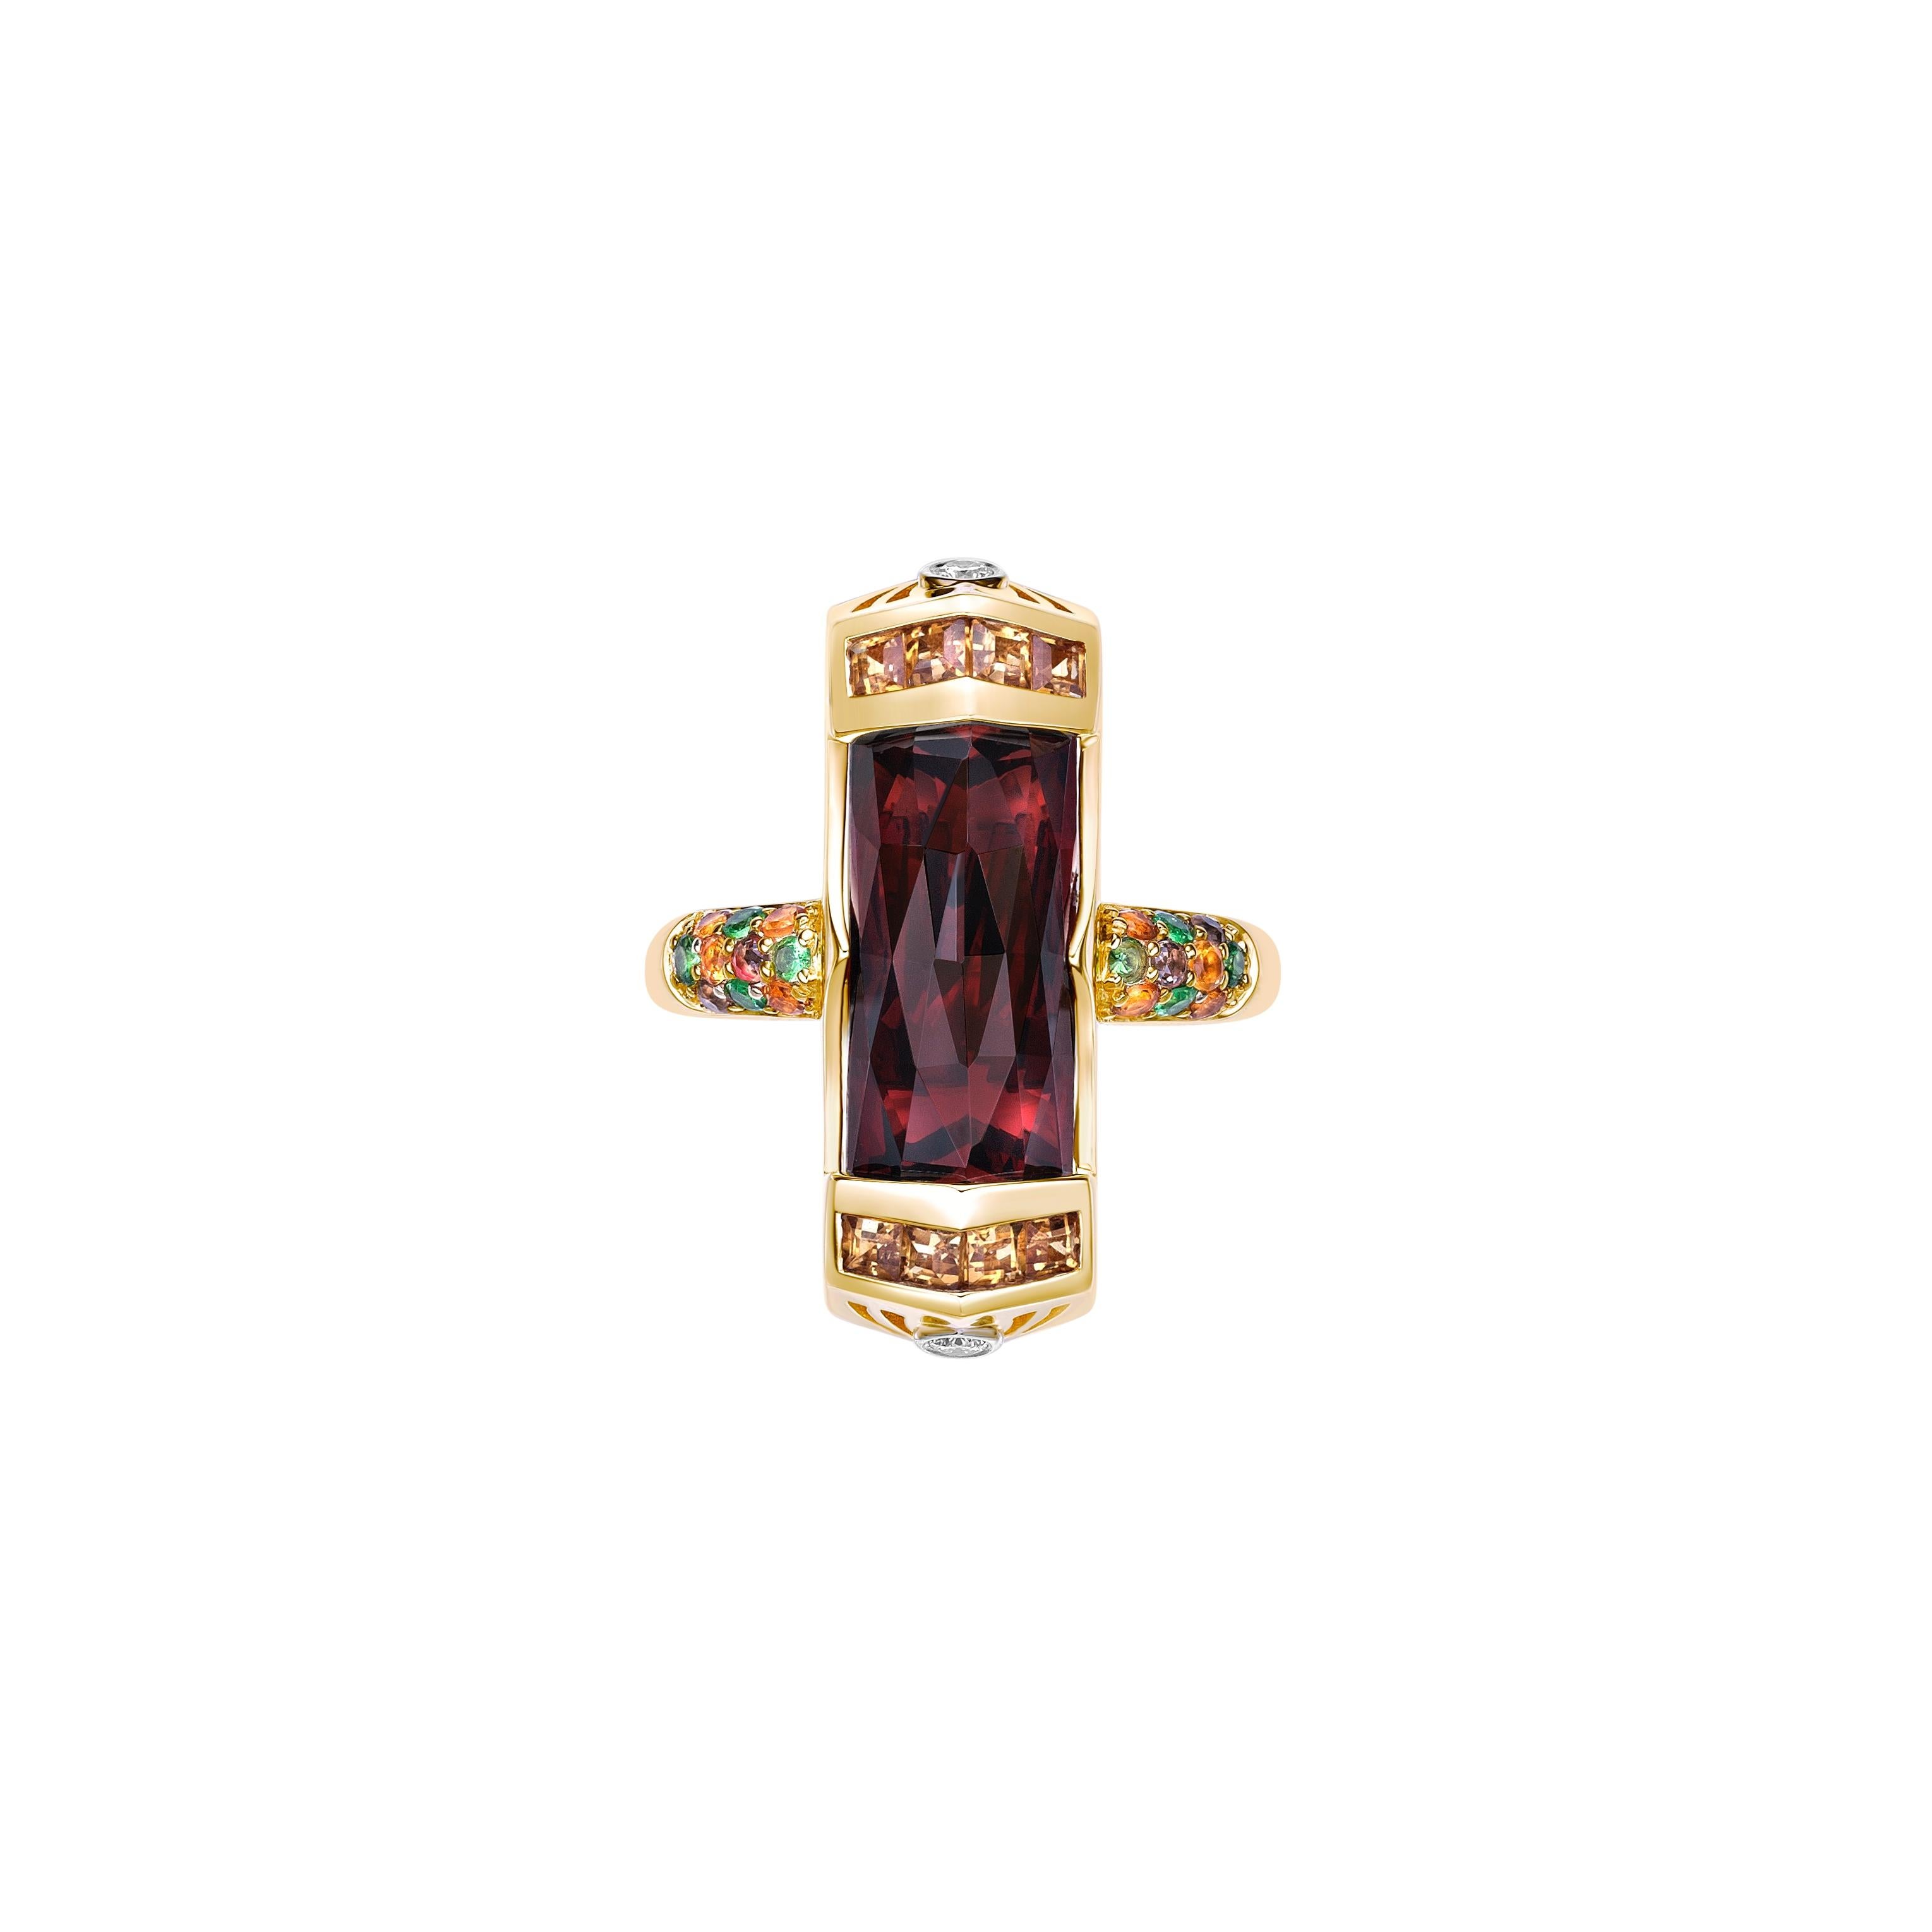 Contemporary 9.25 Carat Garnet Cocktail Ring in 18KYG with Multi Gemstone and Diamond. For Sale